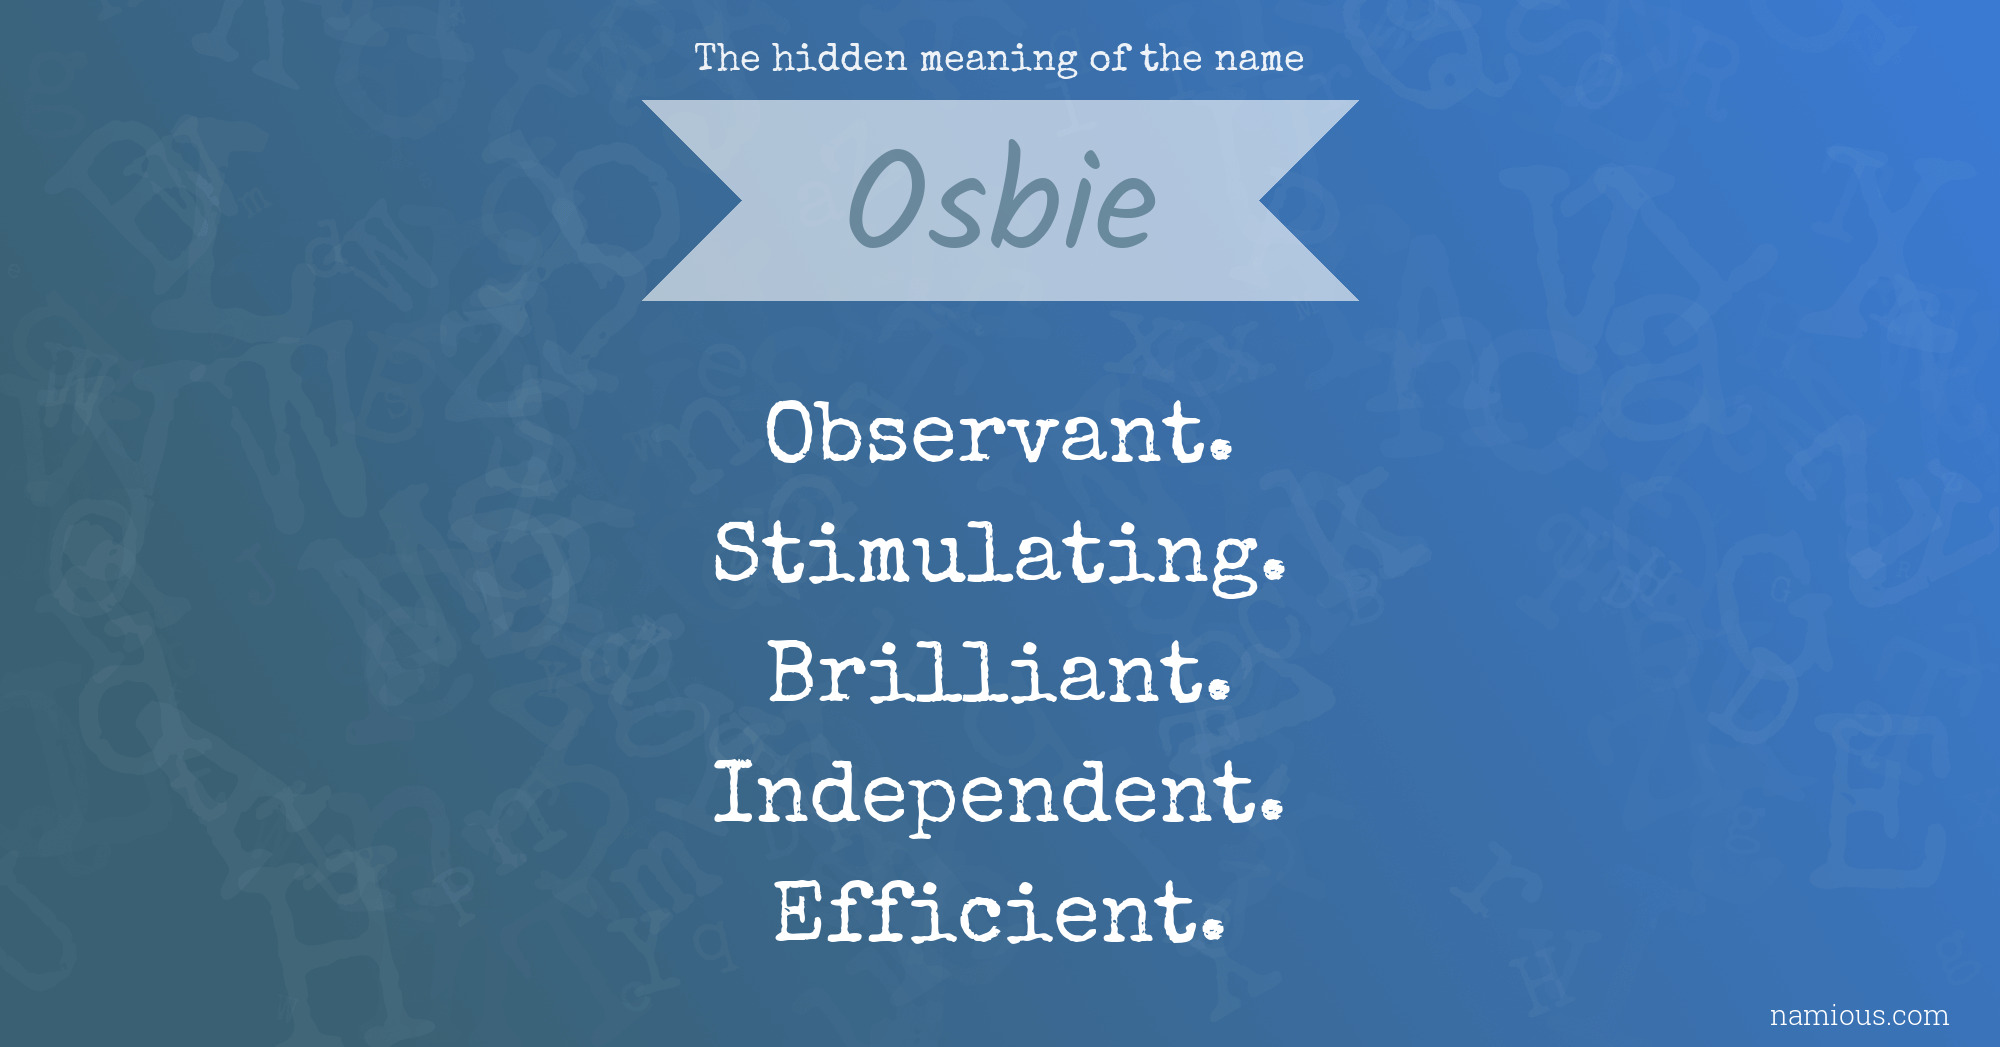 The hidden meaning of the name Osbie